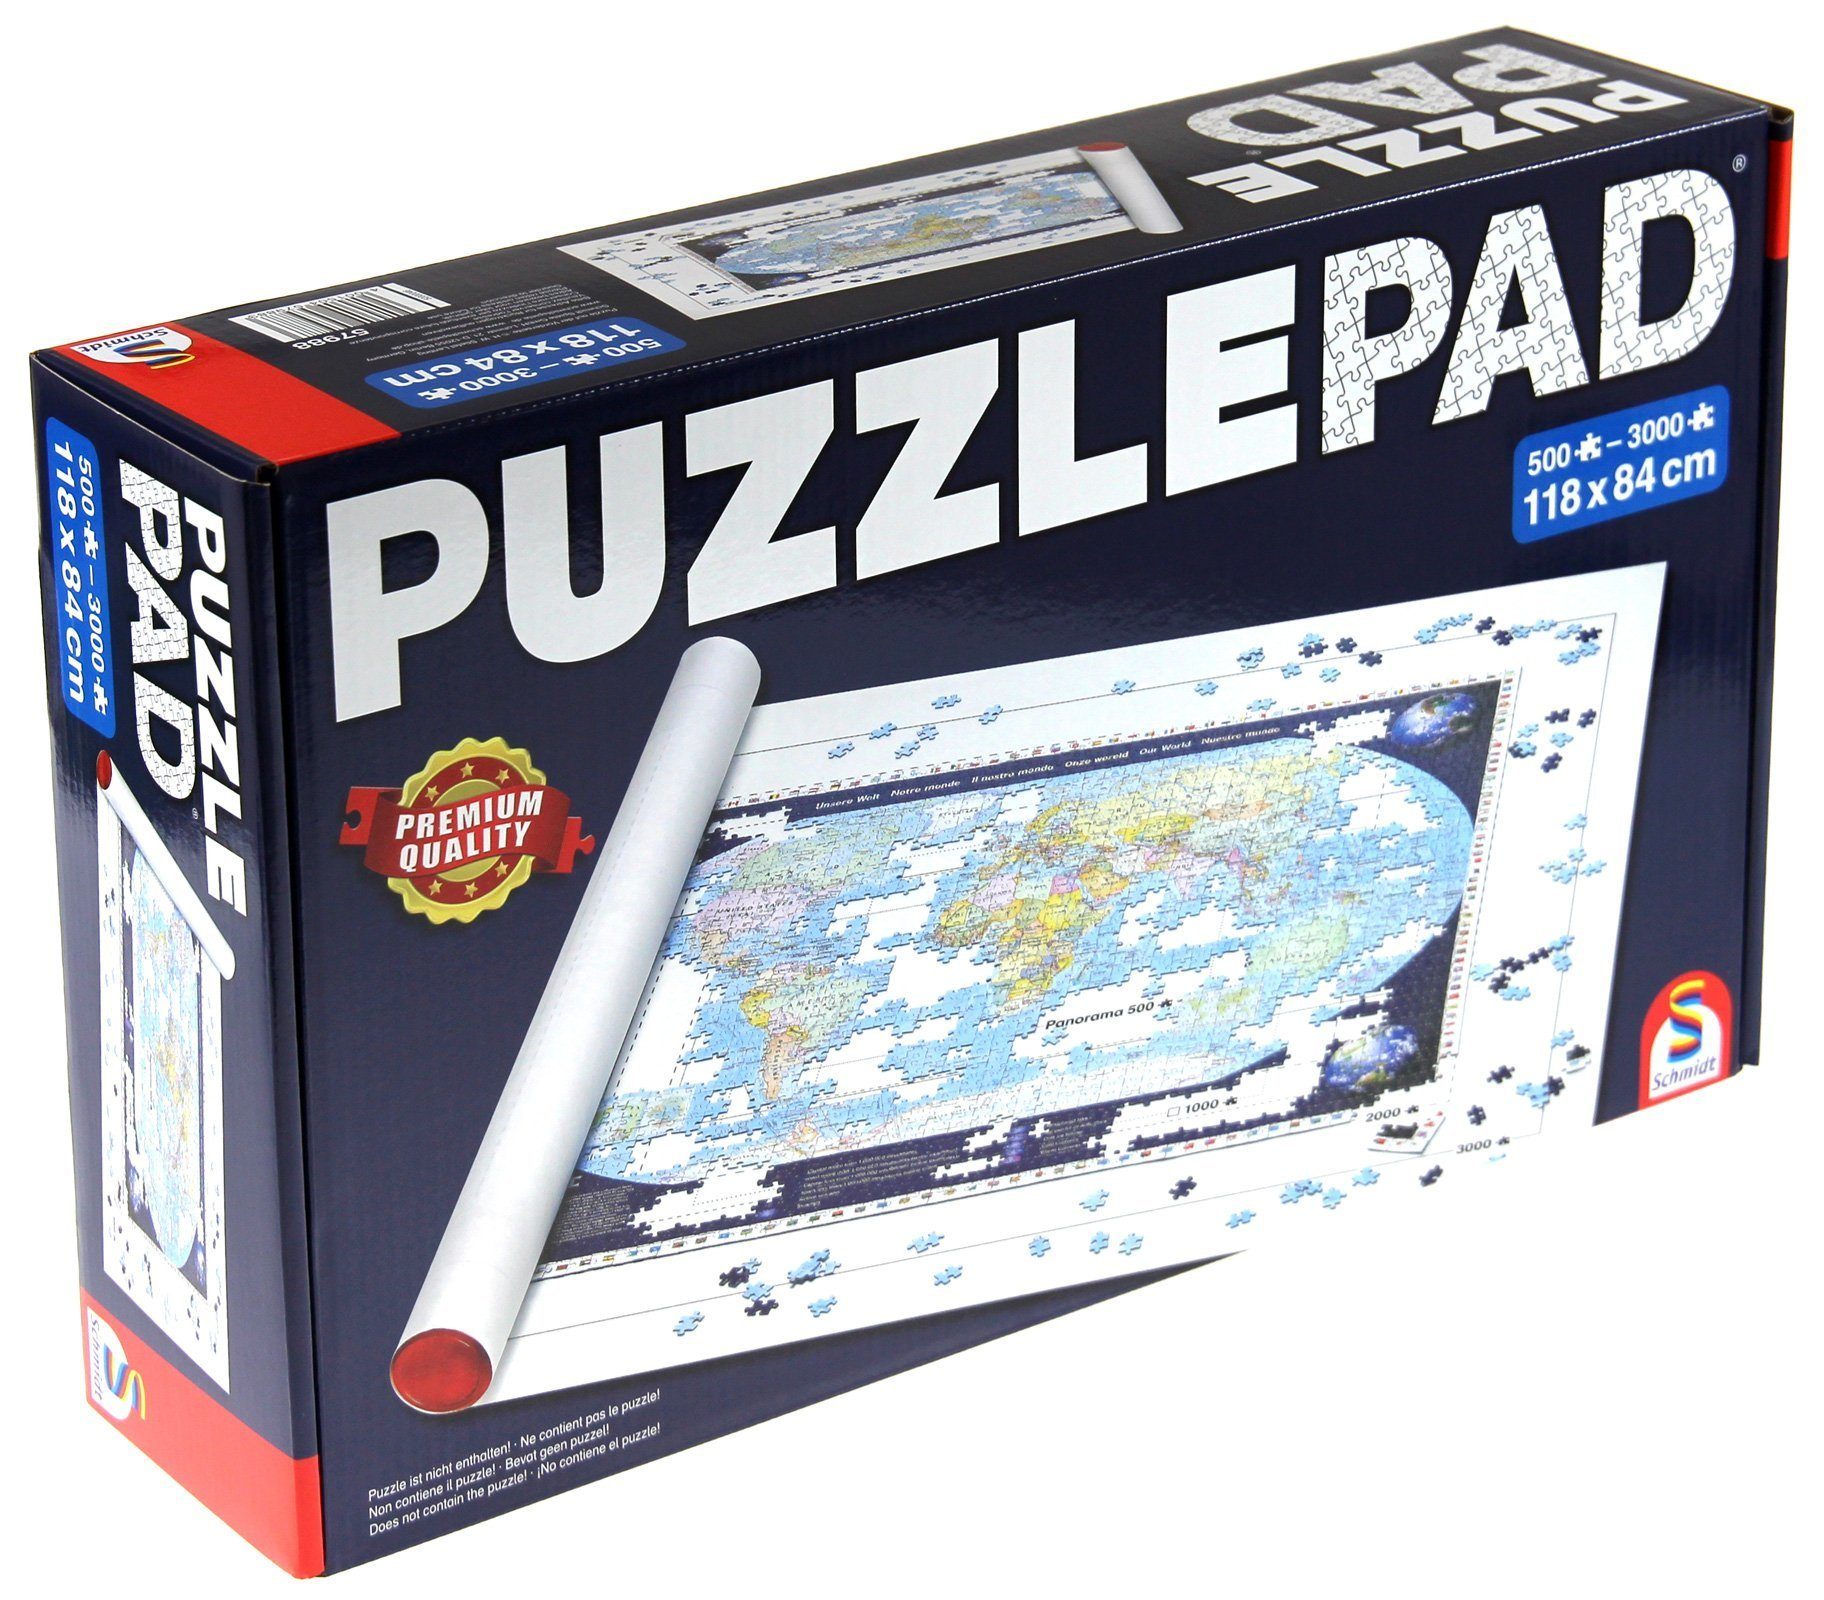 Puzzle Puzzle Roll Mat up to 3000 pieces